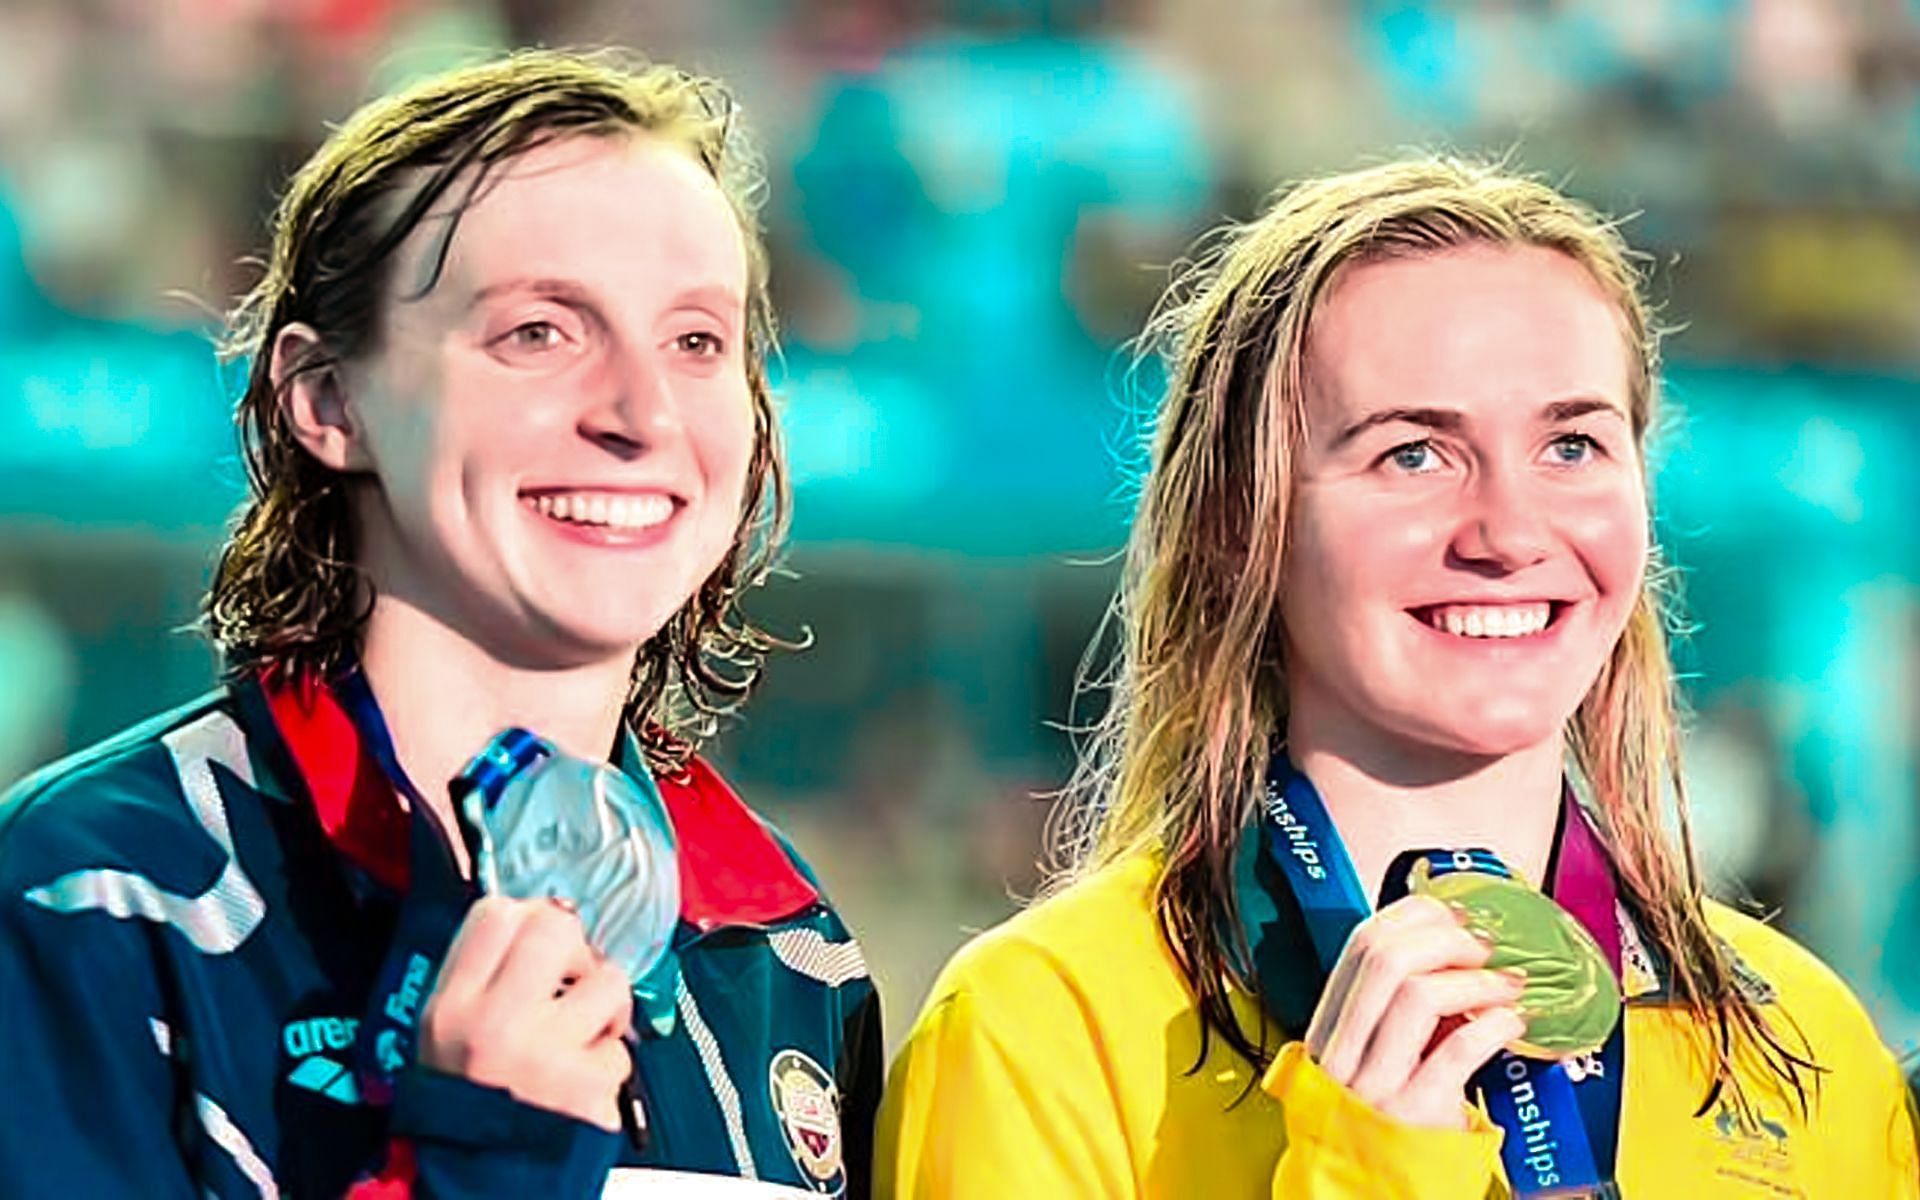 Ariarne beat Katie to clinch the gold medal at the 2019 World Aquatics Championships in the 400 meter freestyle (Image via Olympics)